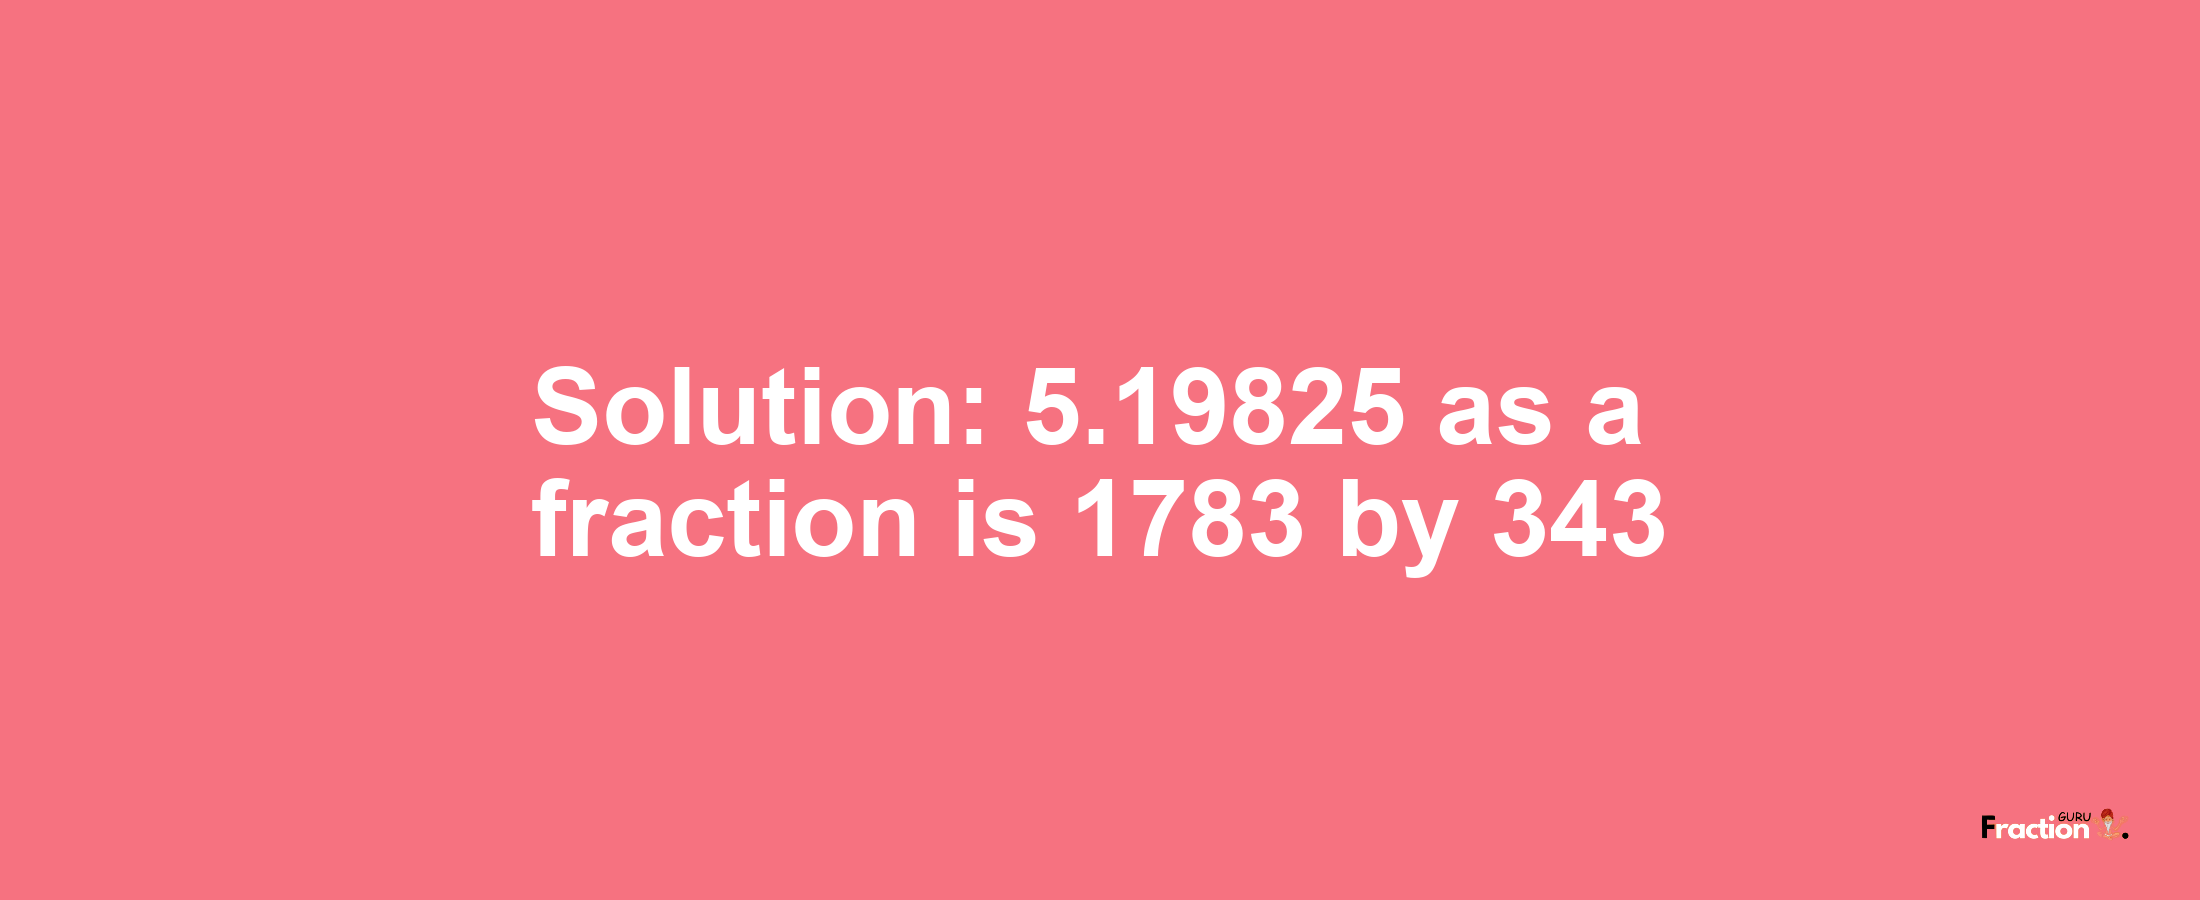 Solution:5.19825 as a fraction is 1783/343